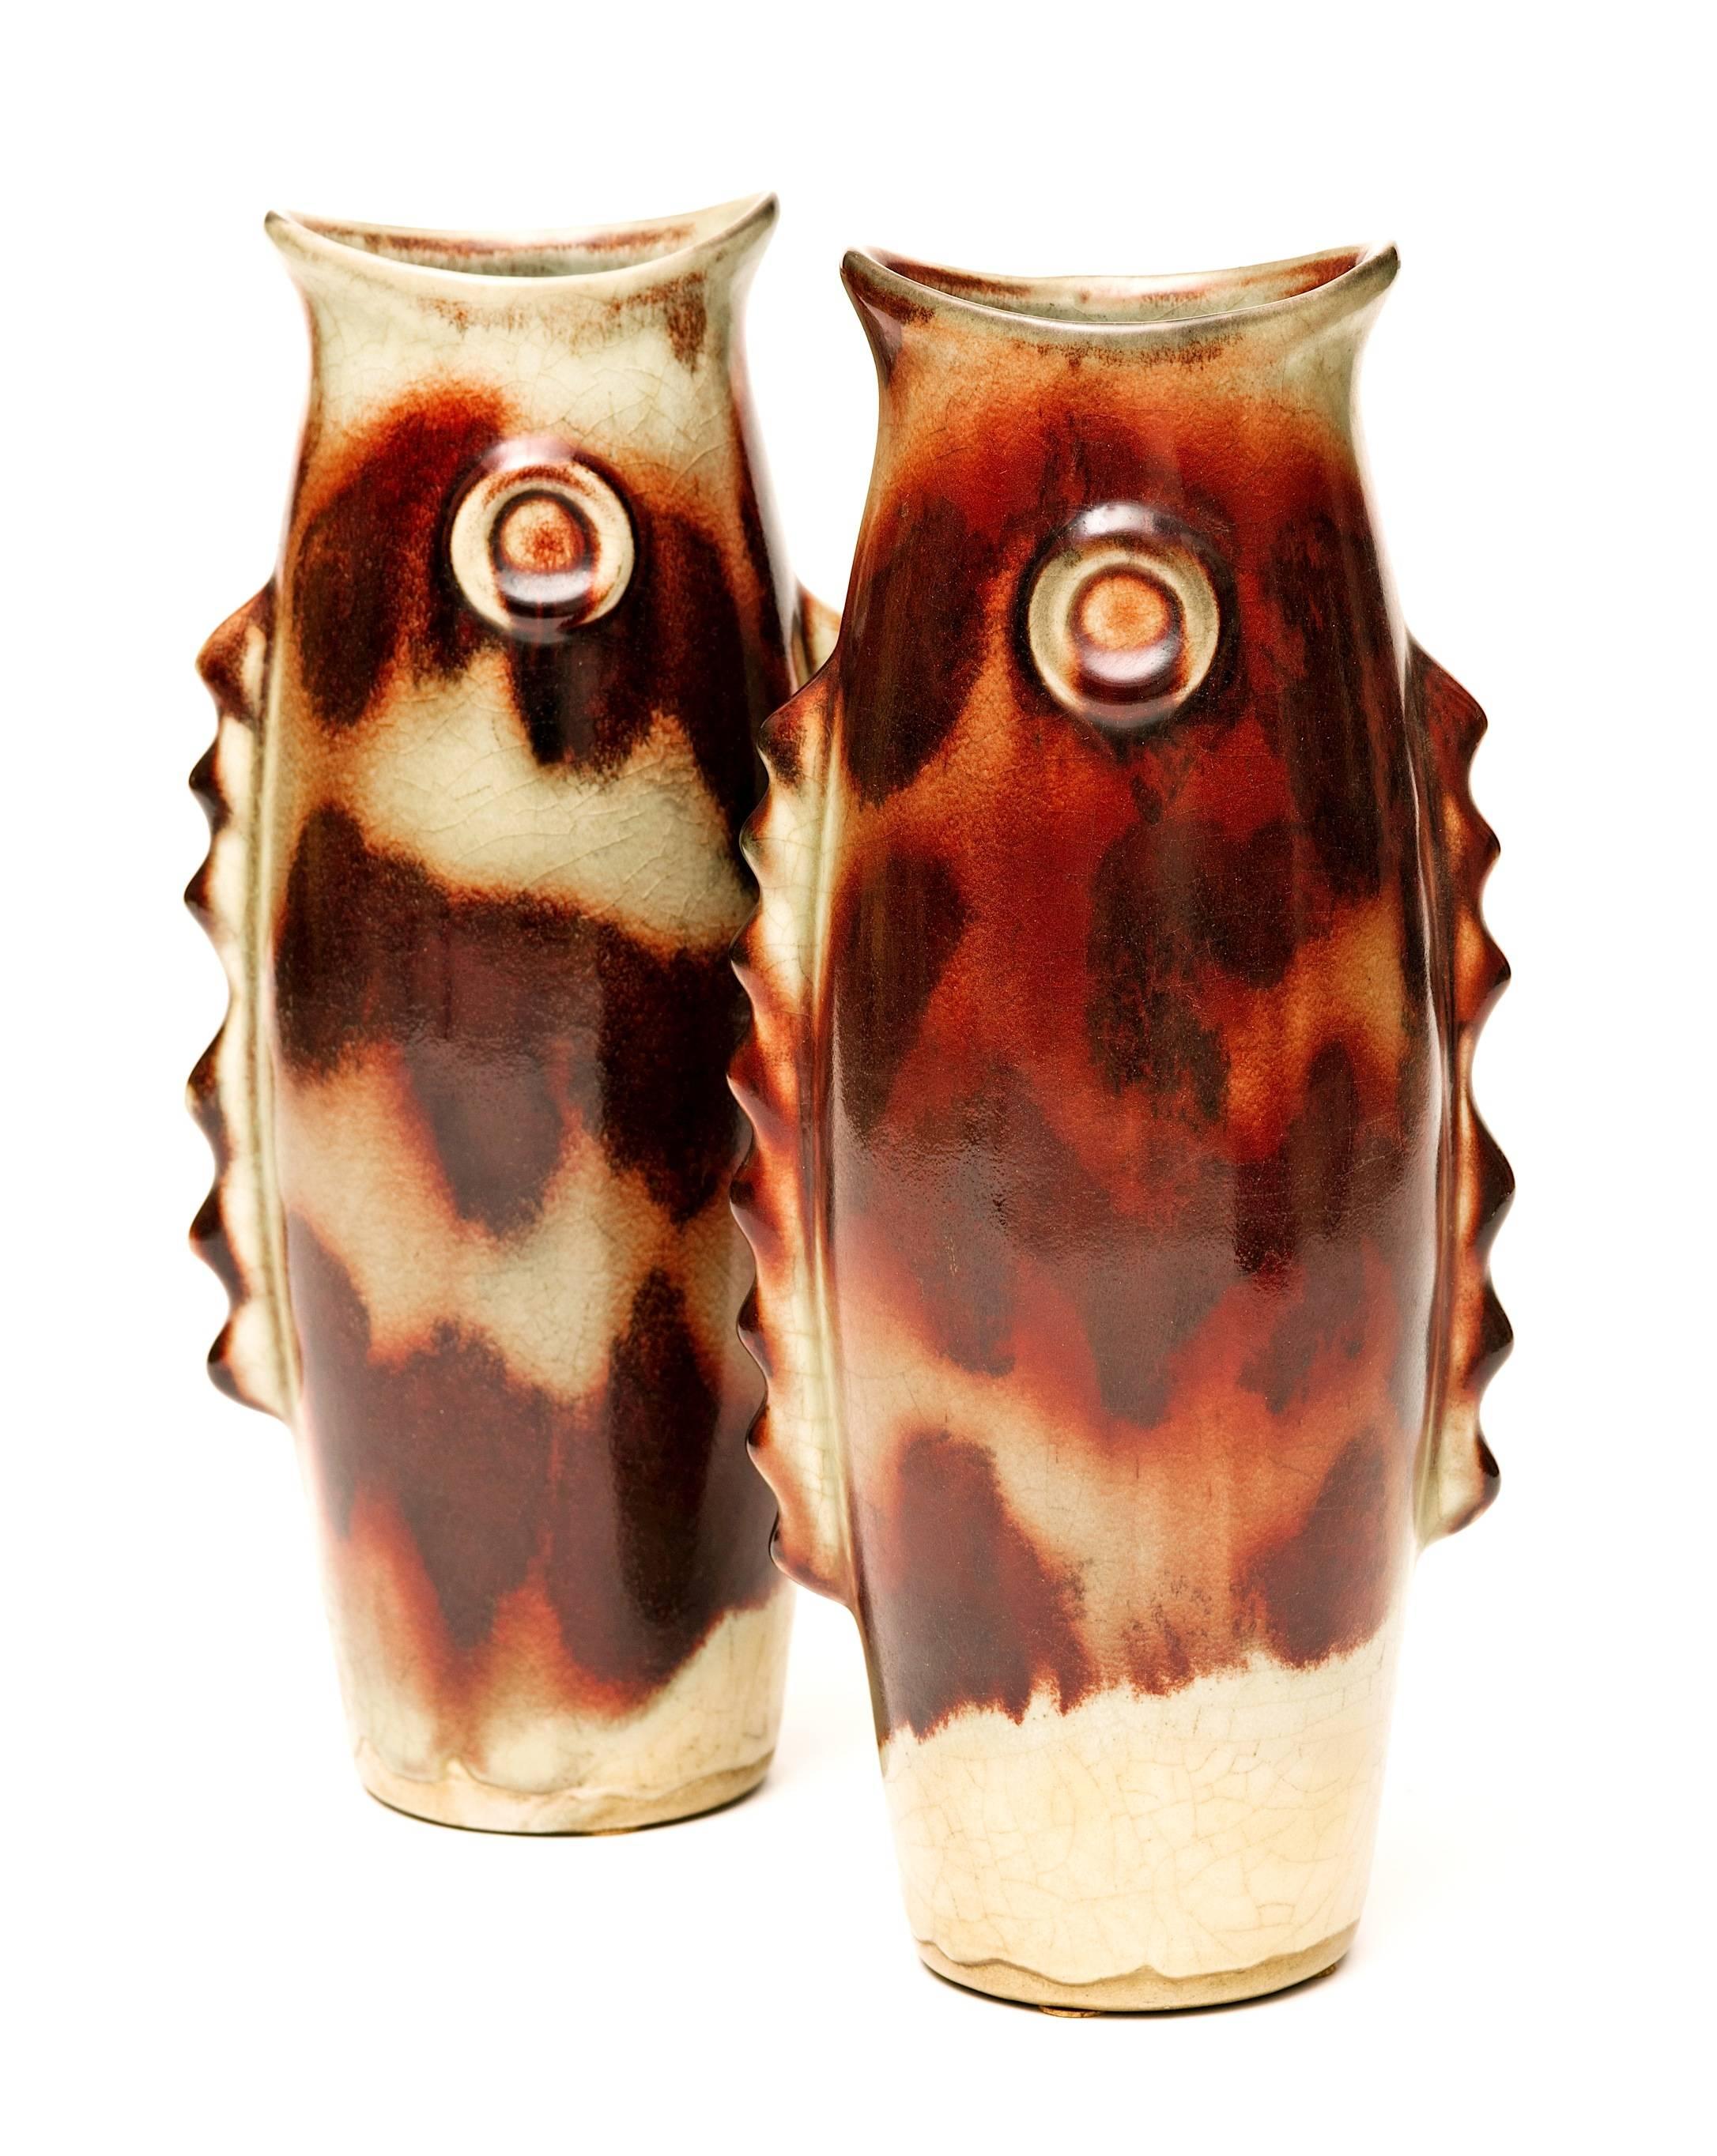 A stunning pair of Sculptural Asian Art Deco ceramic fish vases, circa 1930s with rich oxblood colors and a crackle glaze. Each hand-painted vase has slight variations and are painted on both sides. These are truly unique both as vases or